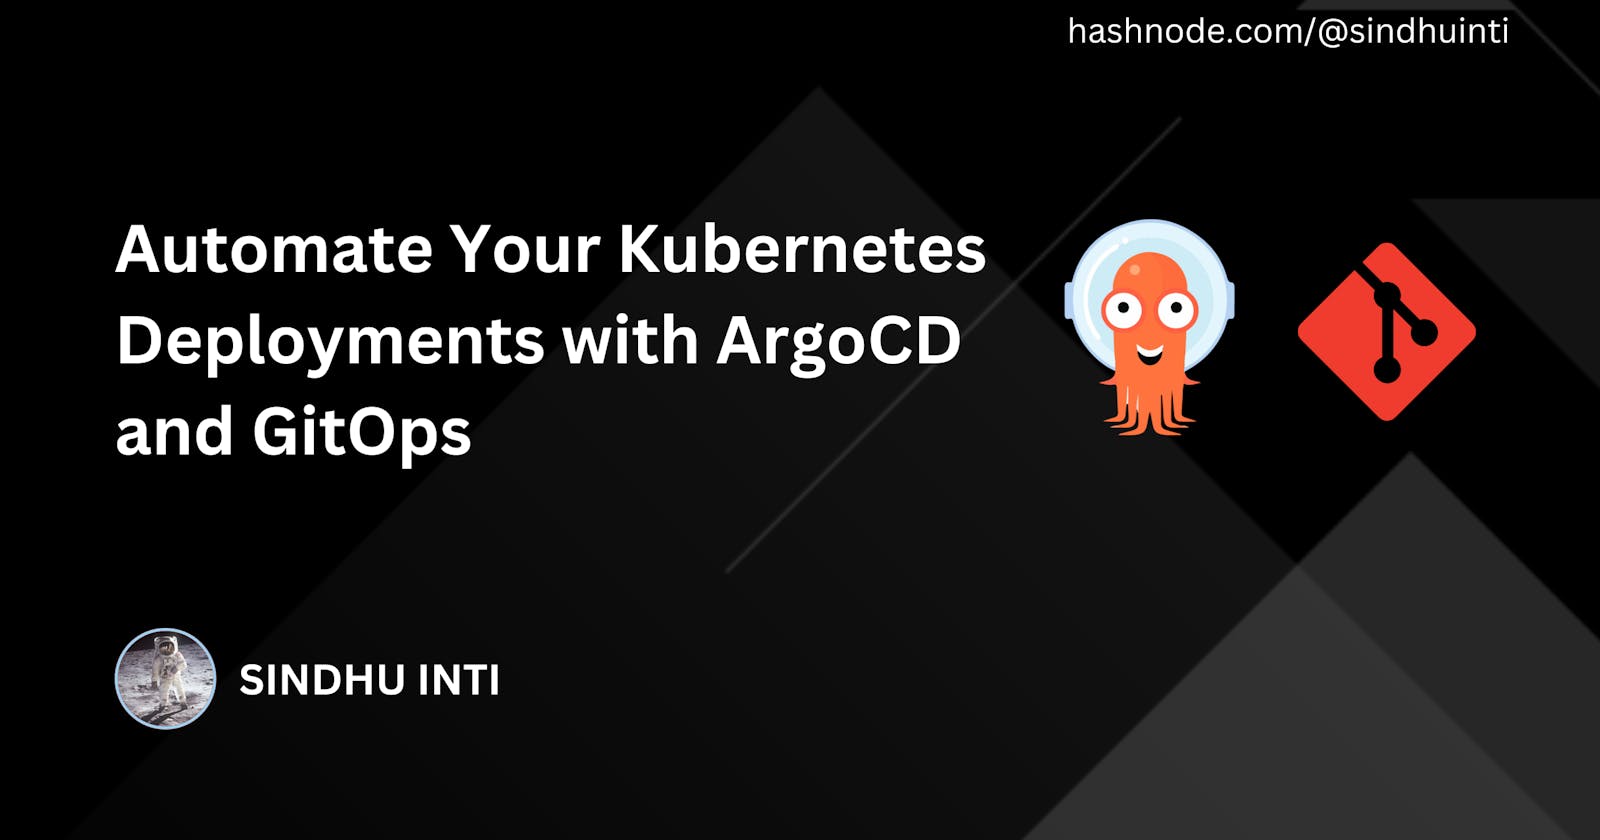 Automate Your Kubernetes Deployments with ArgoCD and GitOps